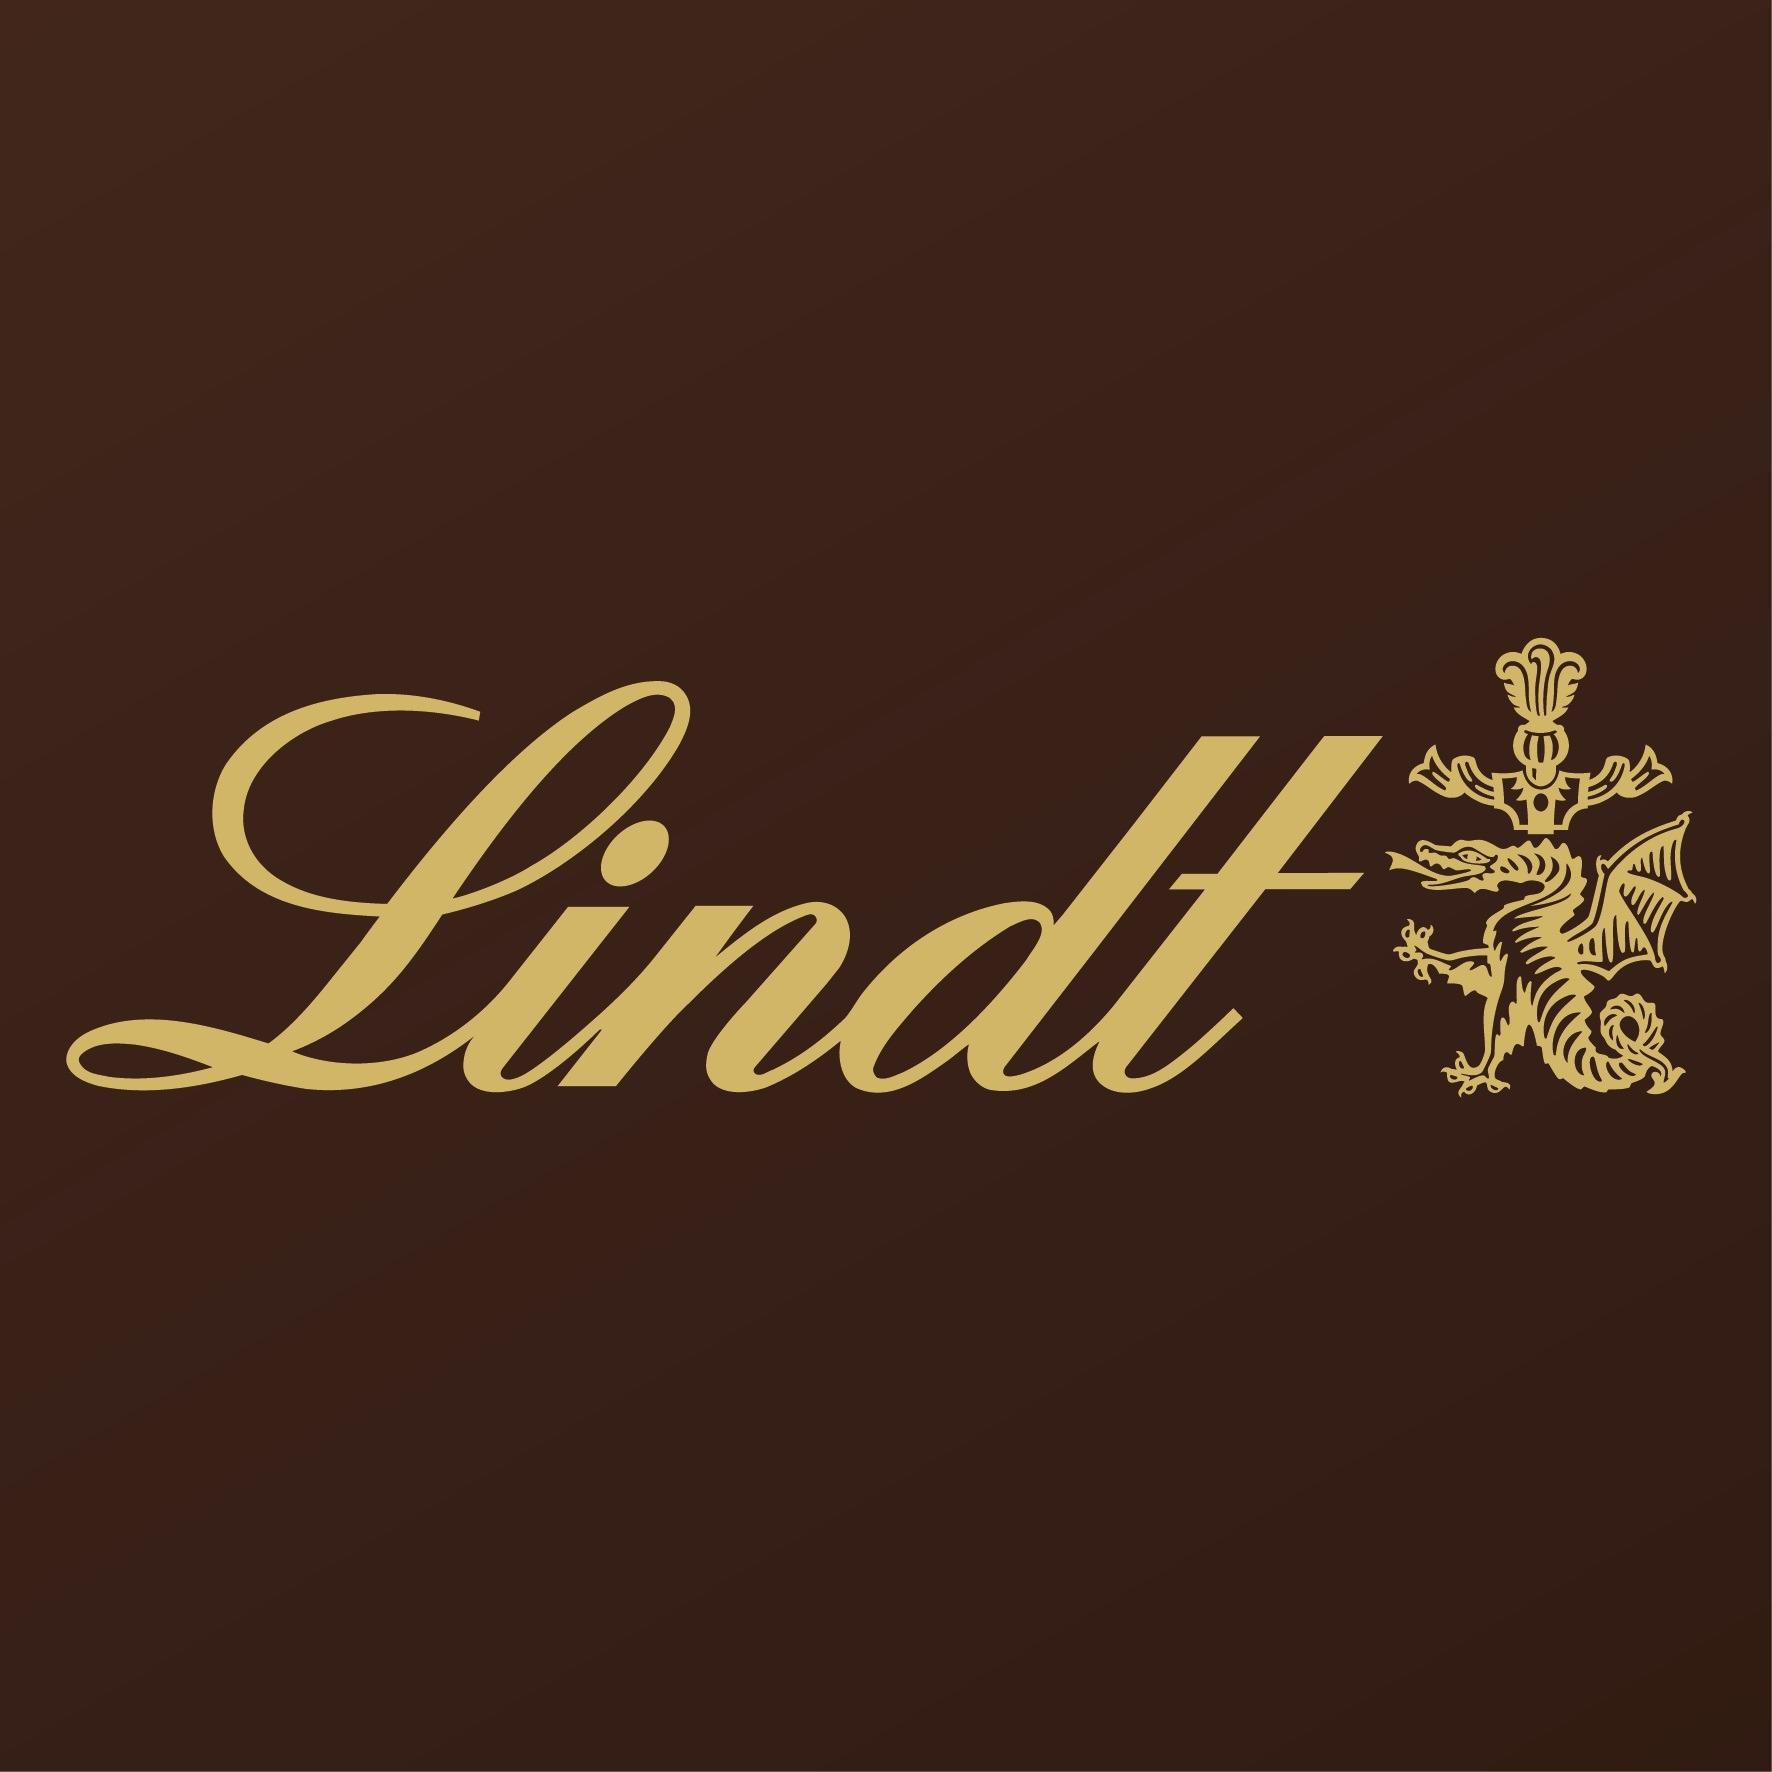 Lindt Outlet Radolfzell in Radolfzell am Bodensee - Logo